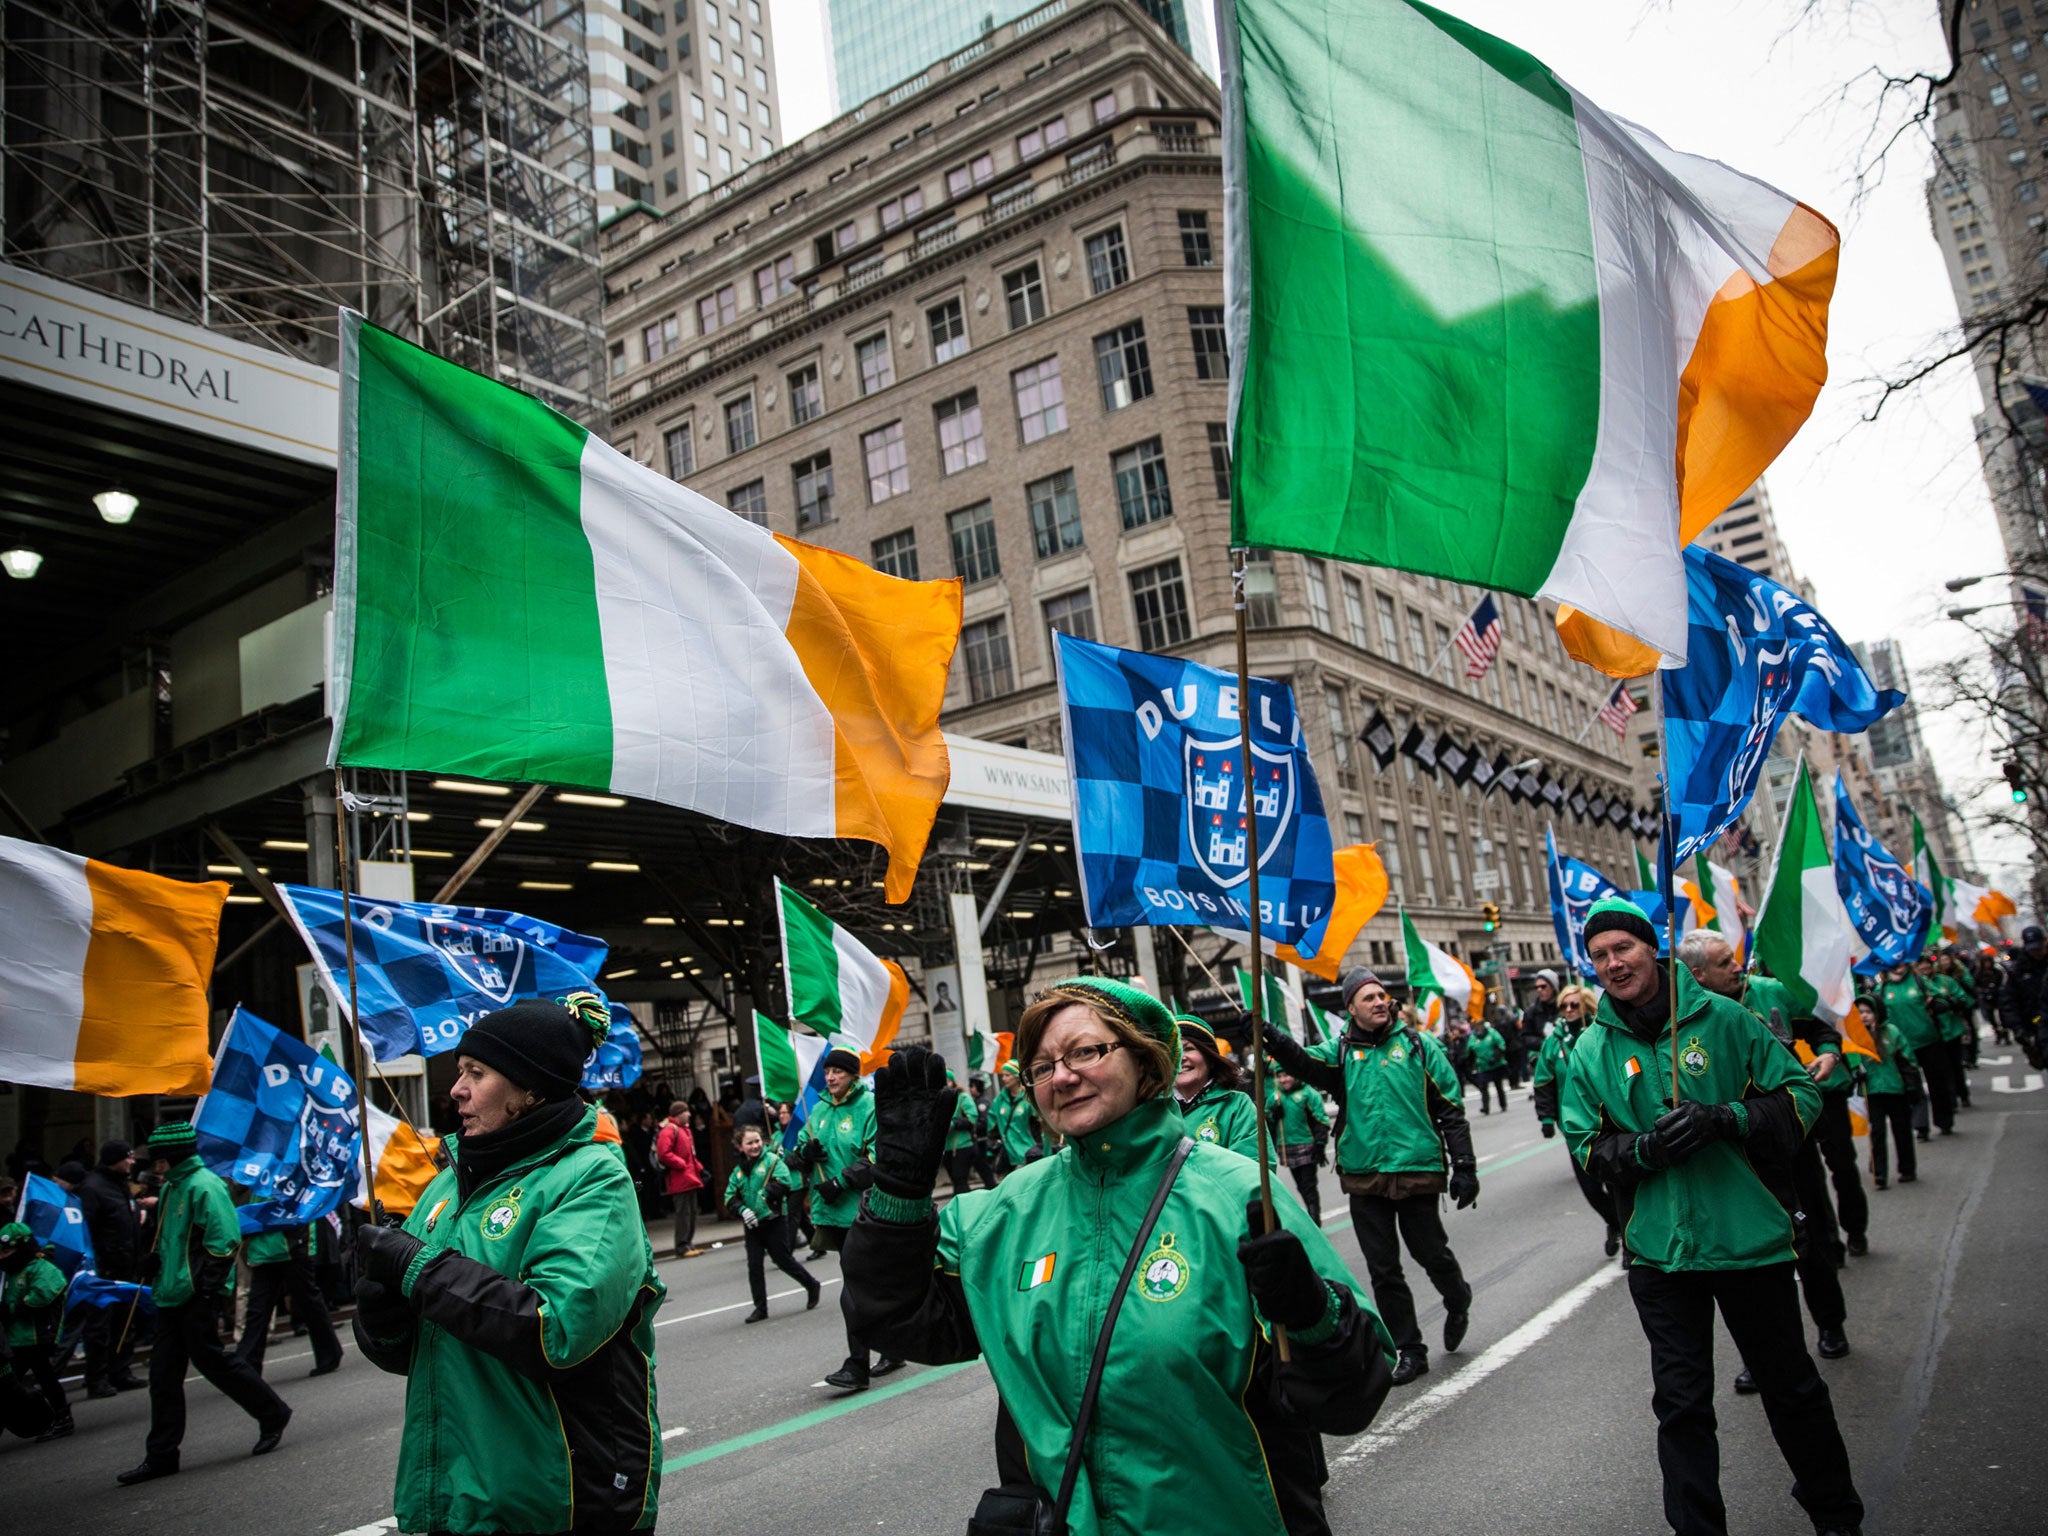 Guinness, normally a generous sponsor of the annual march, has withdrawn its support for the event